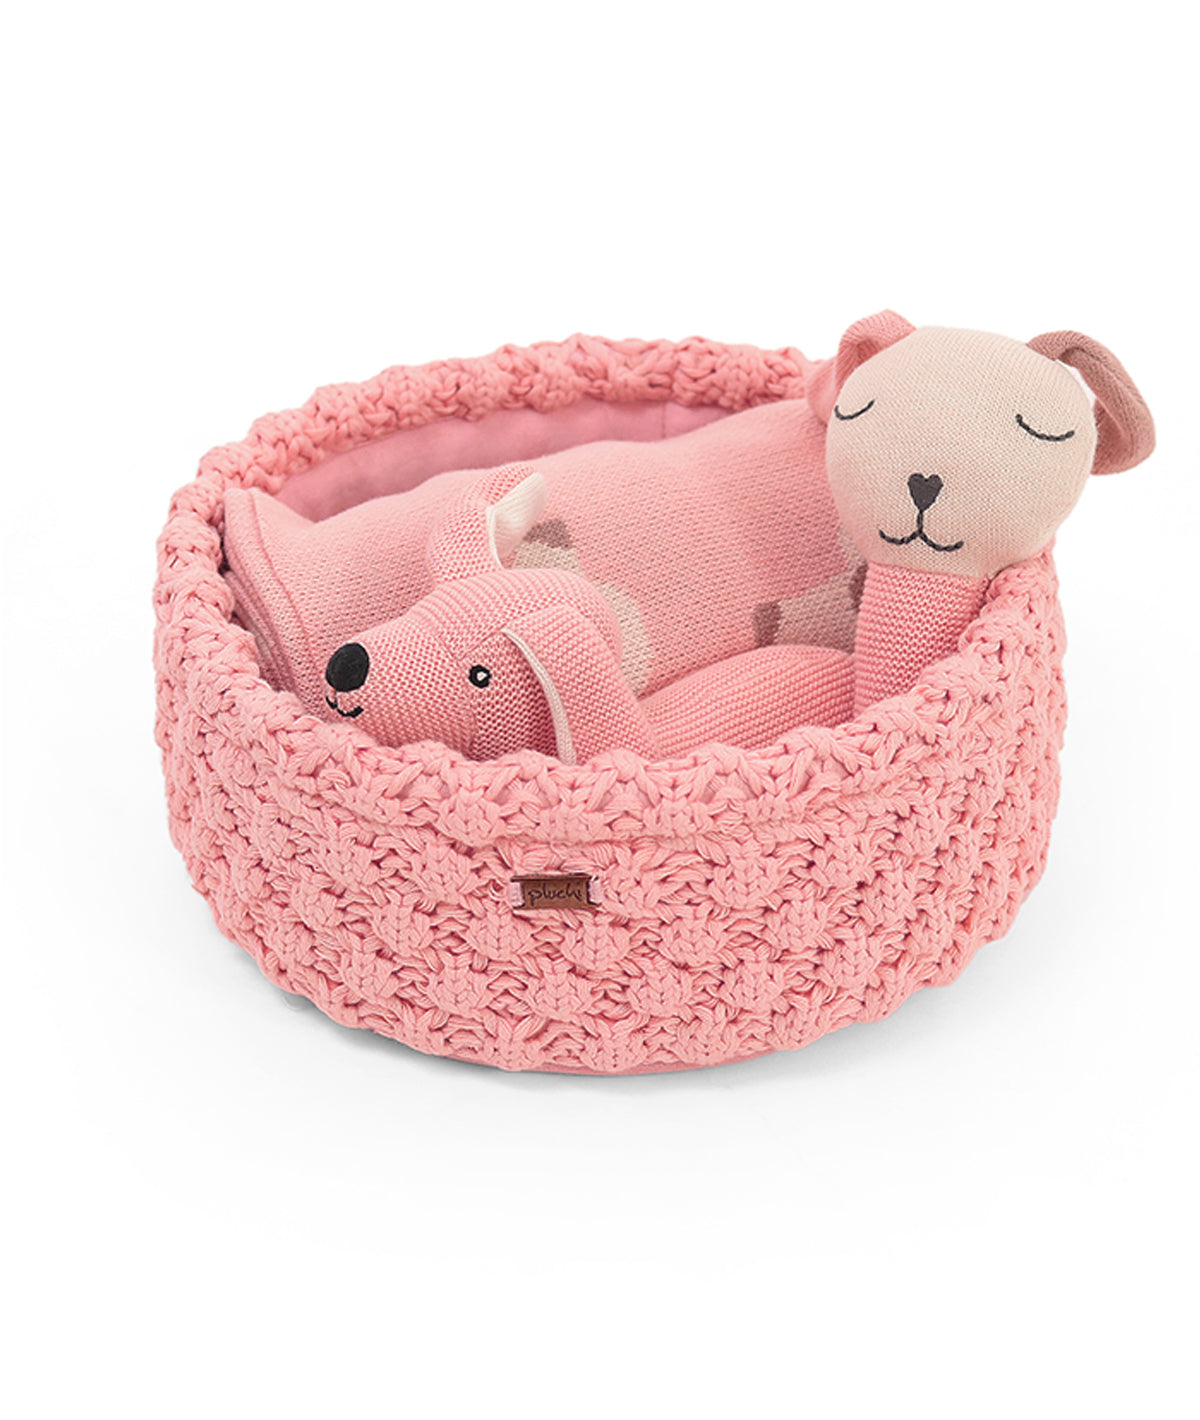 Mutt Gift Basket (Set of 4 pcs - Storage Basket, Knitted Baby Blanket, Soft Toy, and Rattle)